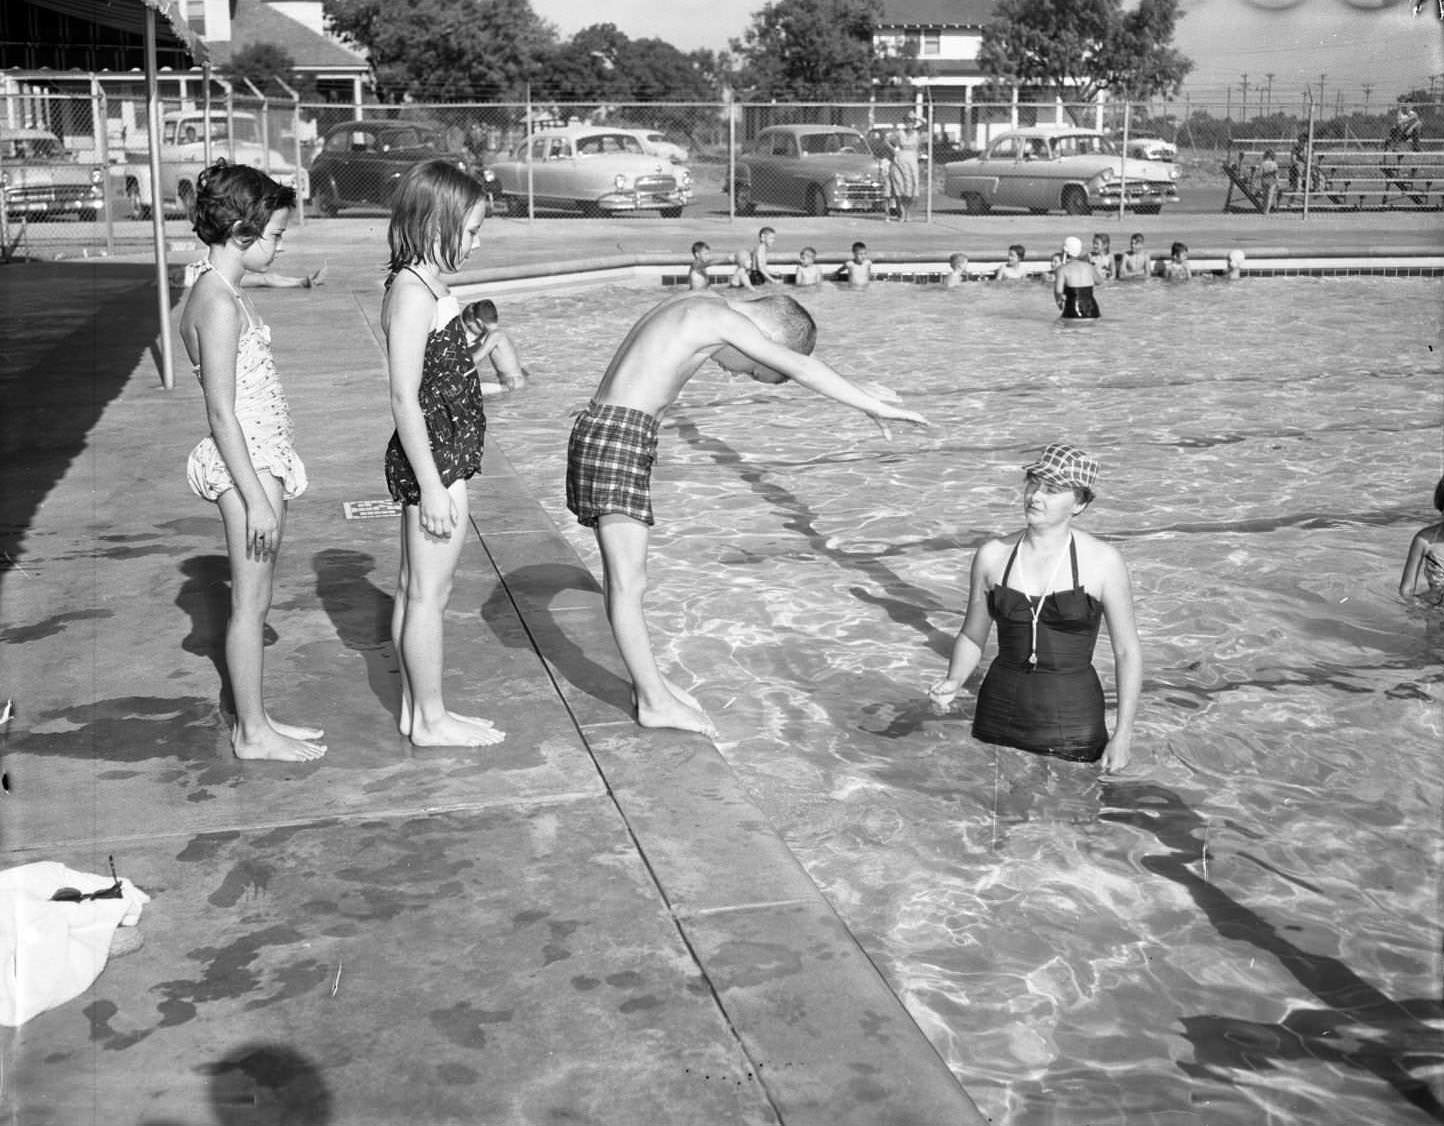 The opening day for the Veterans of Foreign Wars pool on First Street in Abilene, Texas, 1956